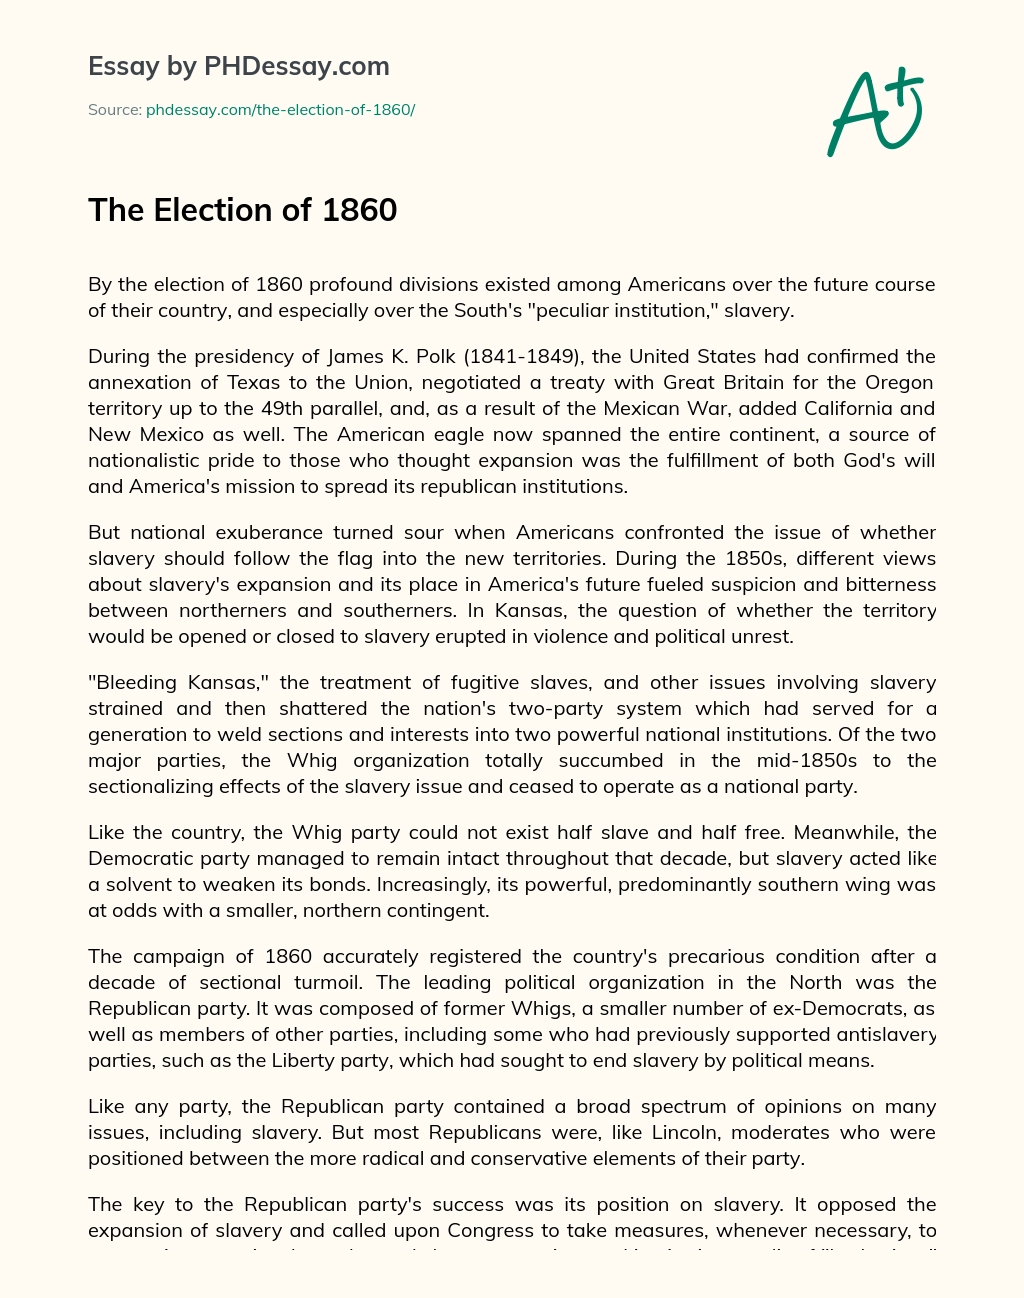 The Election of 1860 essay